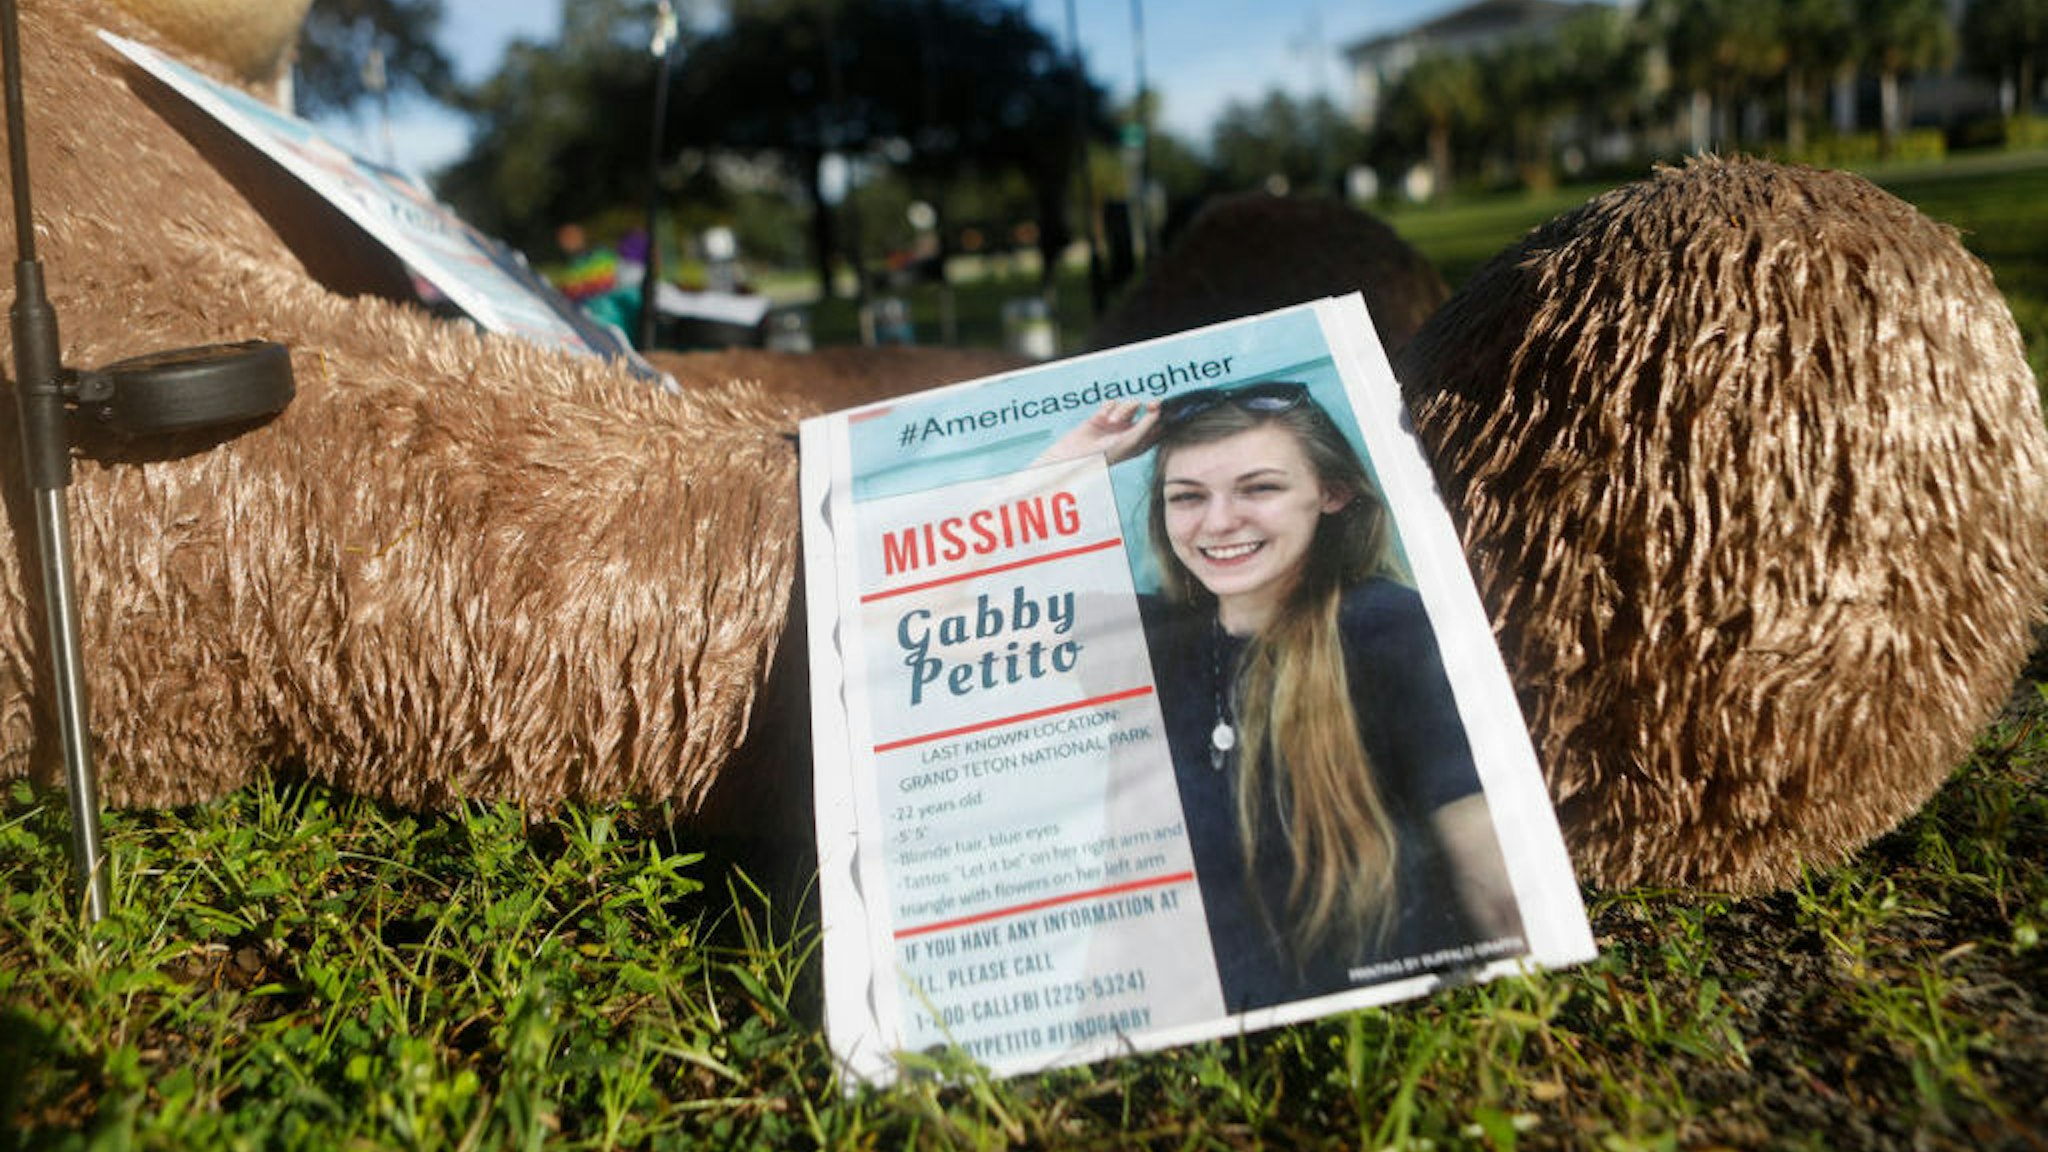 NORTH PORT, FL - SEPTEMBER 20: A makeshift memorial dedicated to missing woman Gabby Petito is located near City Hall on September 20, 2021 in North Port, Florida. A body has been found by authorities in Grand Teton National Park in Wyoming that fits the description of Petito, who went missing while on a cross-country trip with her boyfriend Brian Laundrie. (Photo by Octavio Jones/Getty Images)